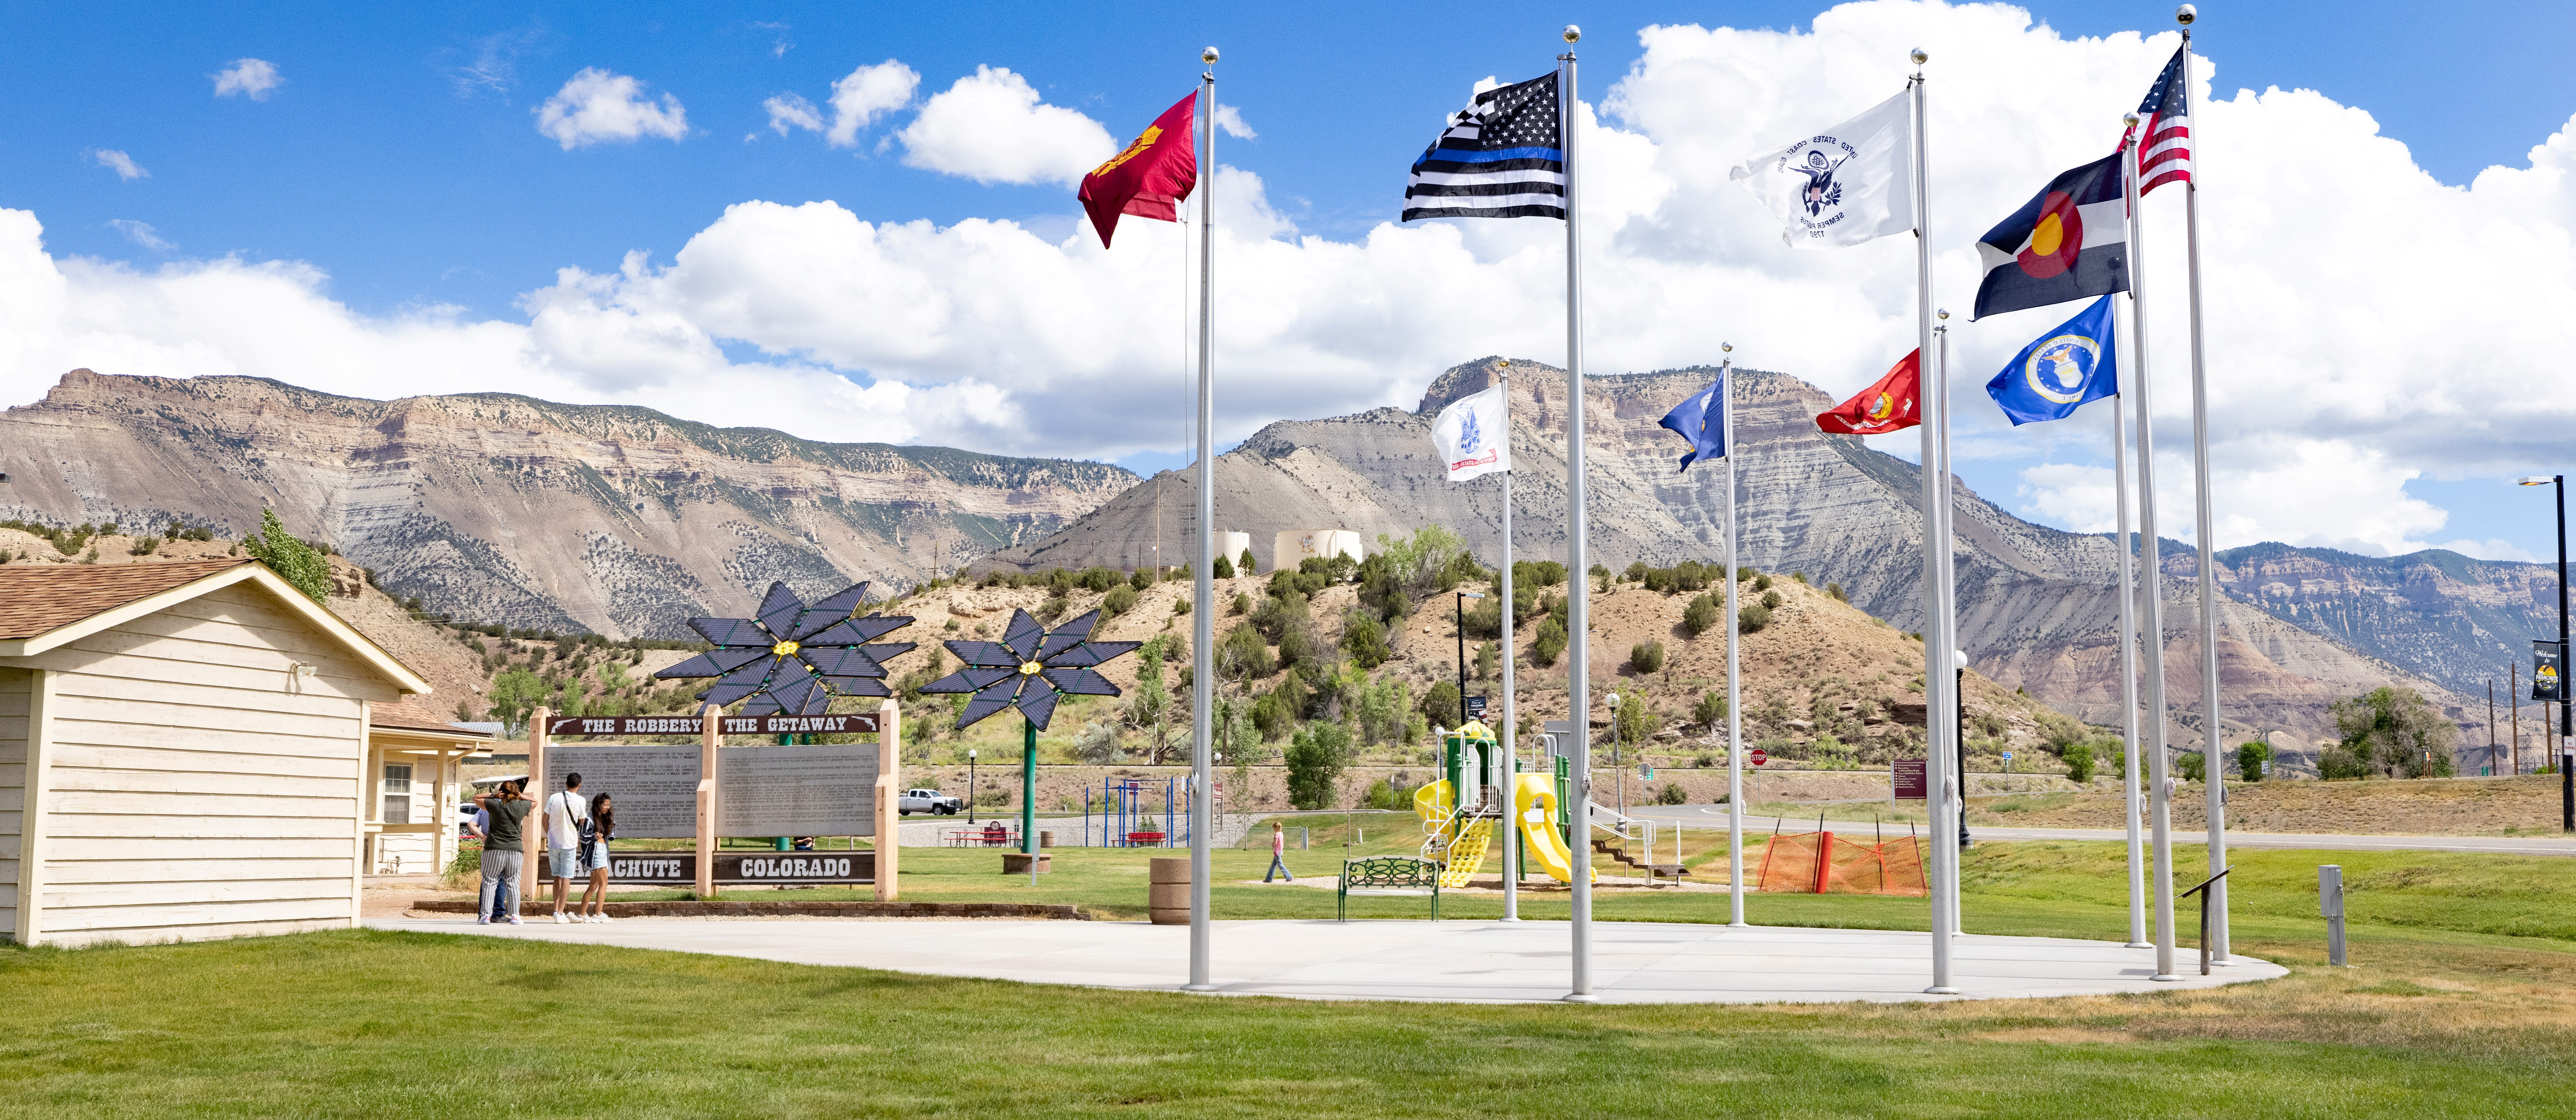 outdoor restarea pavilion with flags